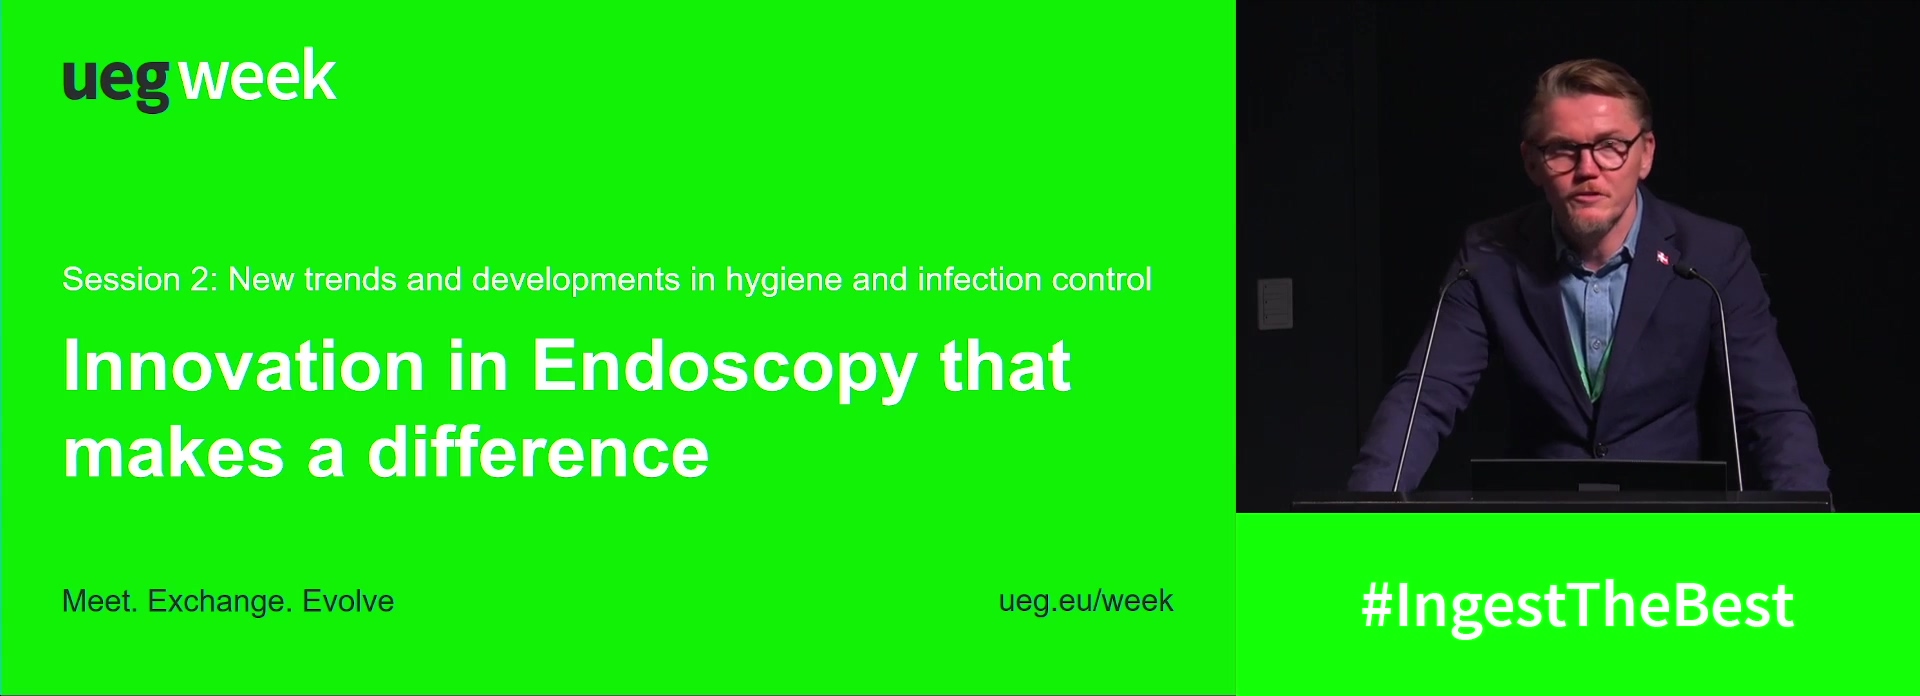 Innovation in endoscopy that makes a difference